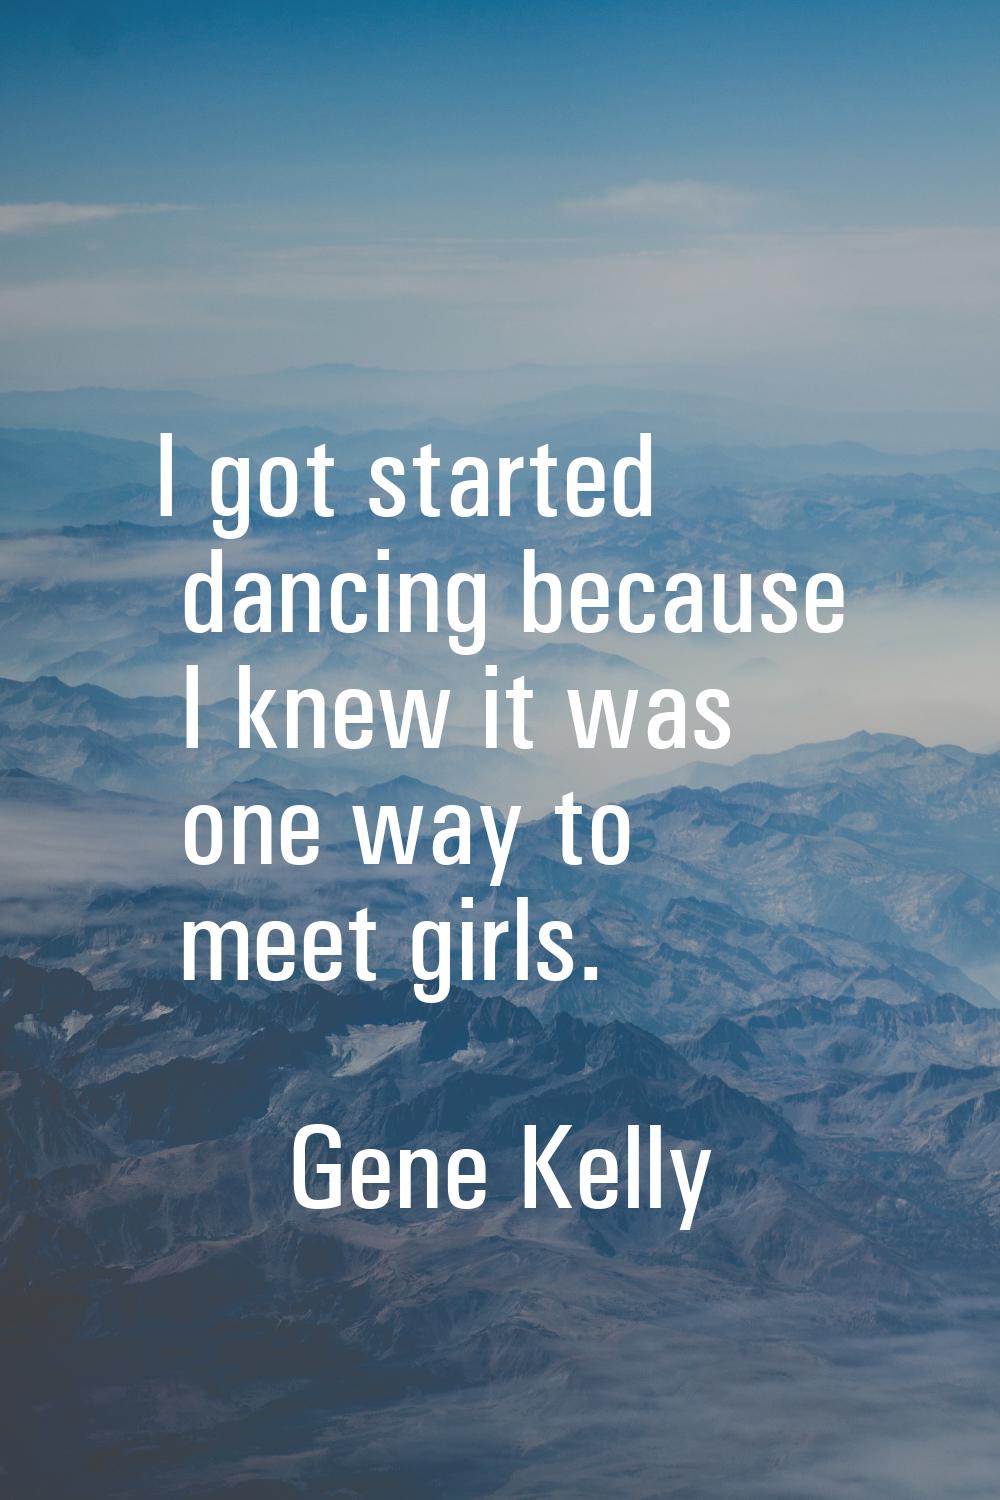 I got started dancing because I knew it was one way to meet girls.